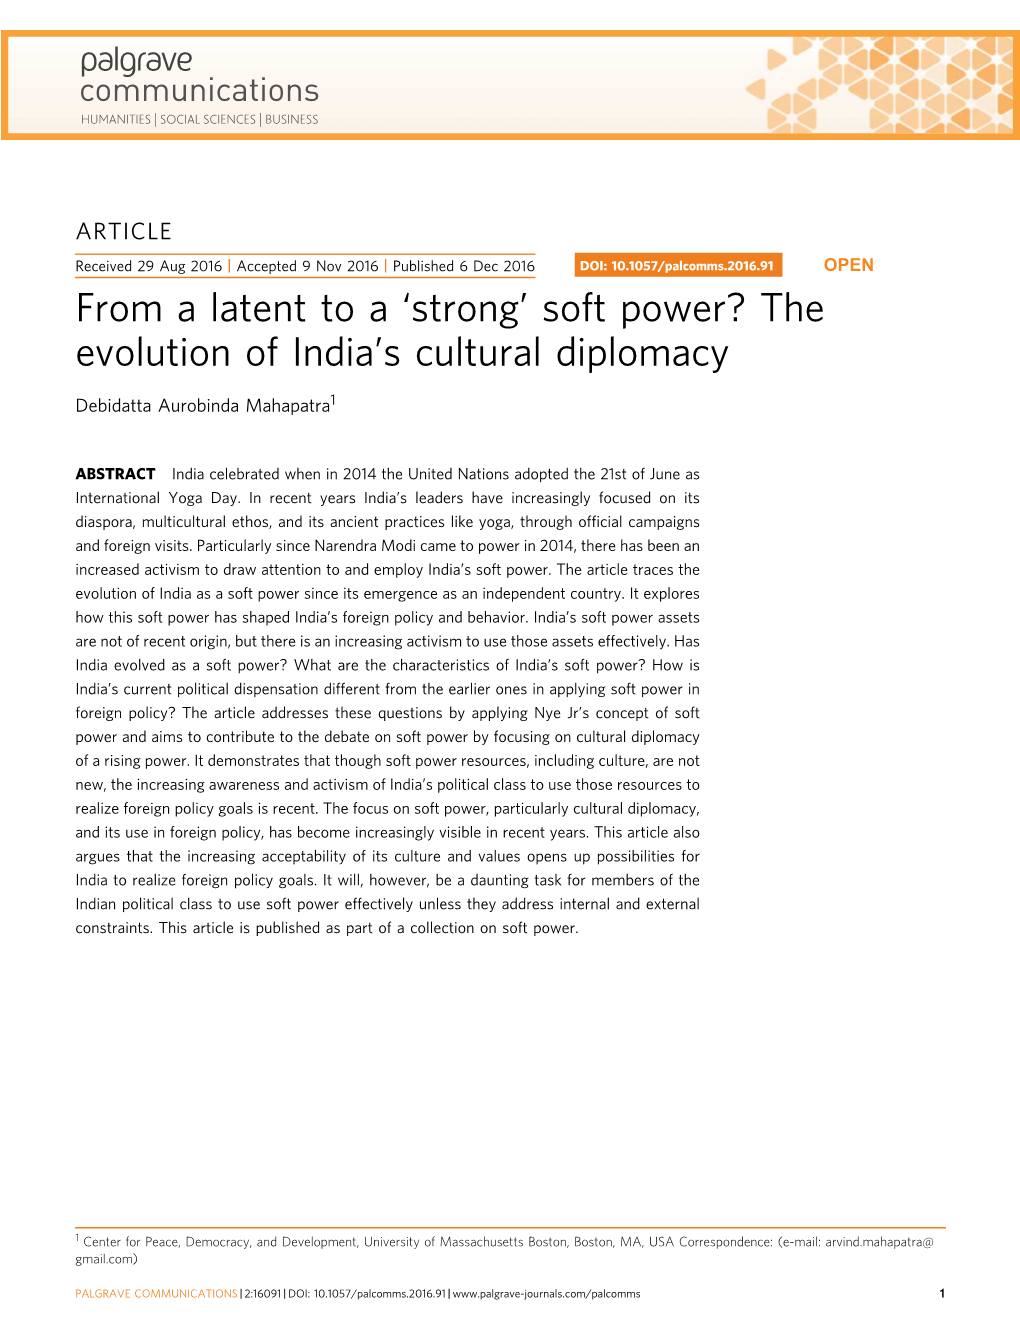 Soft Power? the Evolution of India’S Cultural Diplomacy